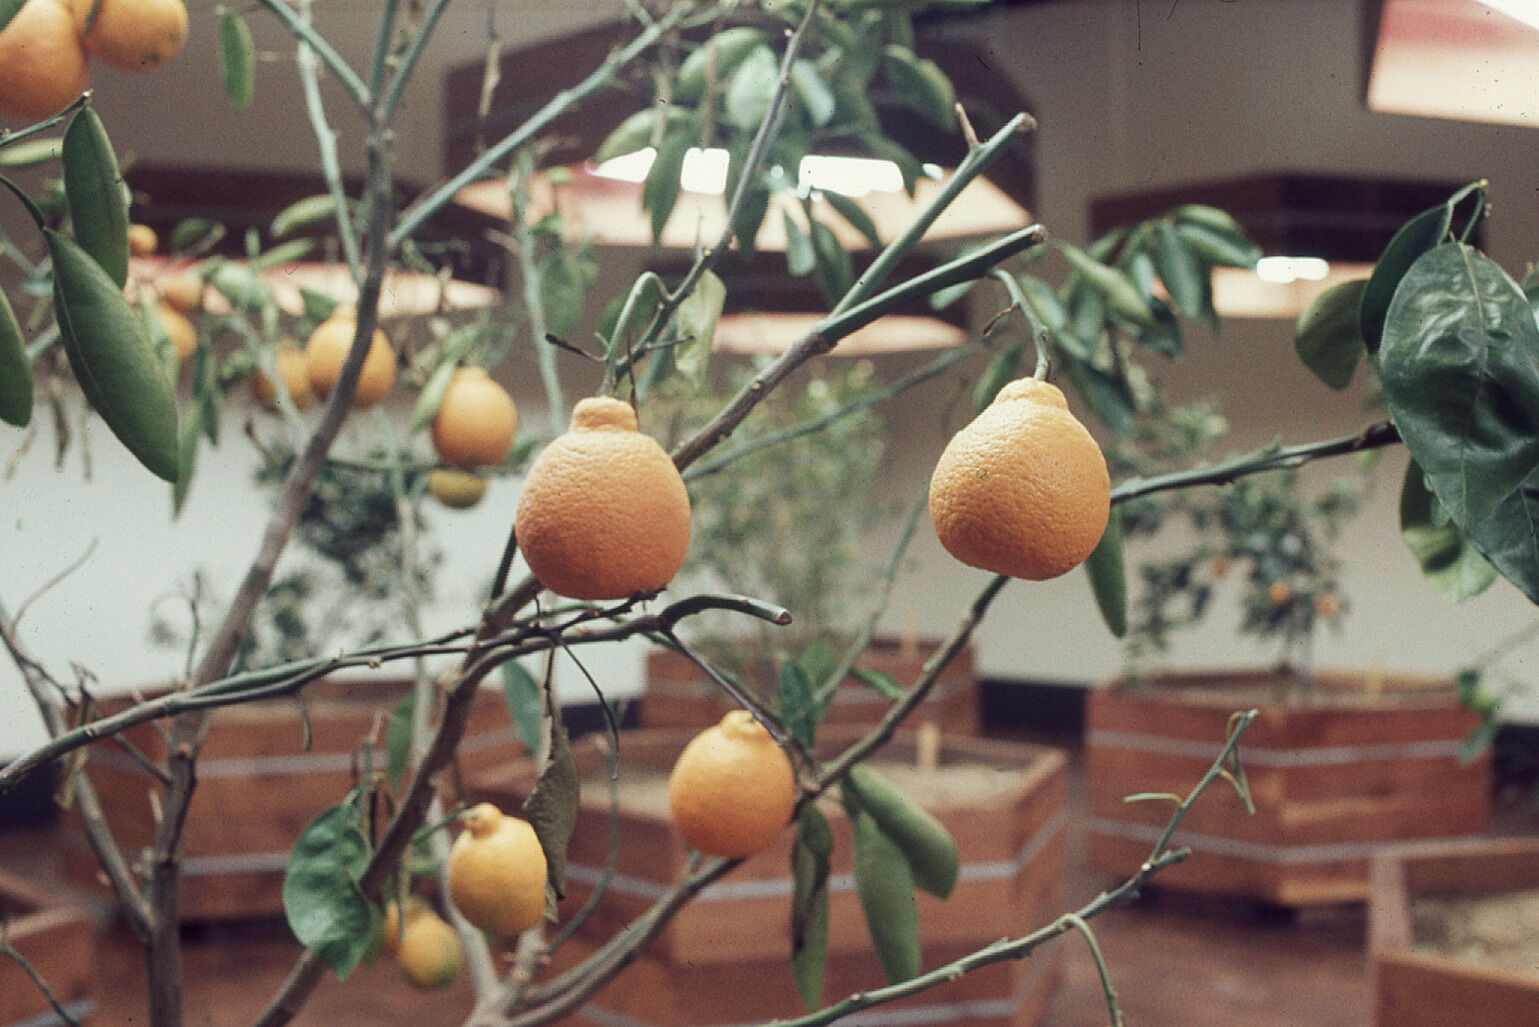 Oranges growing on a tree with green leaves in an indoor garden setting, featuring wooden planters in the background.